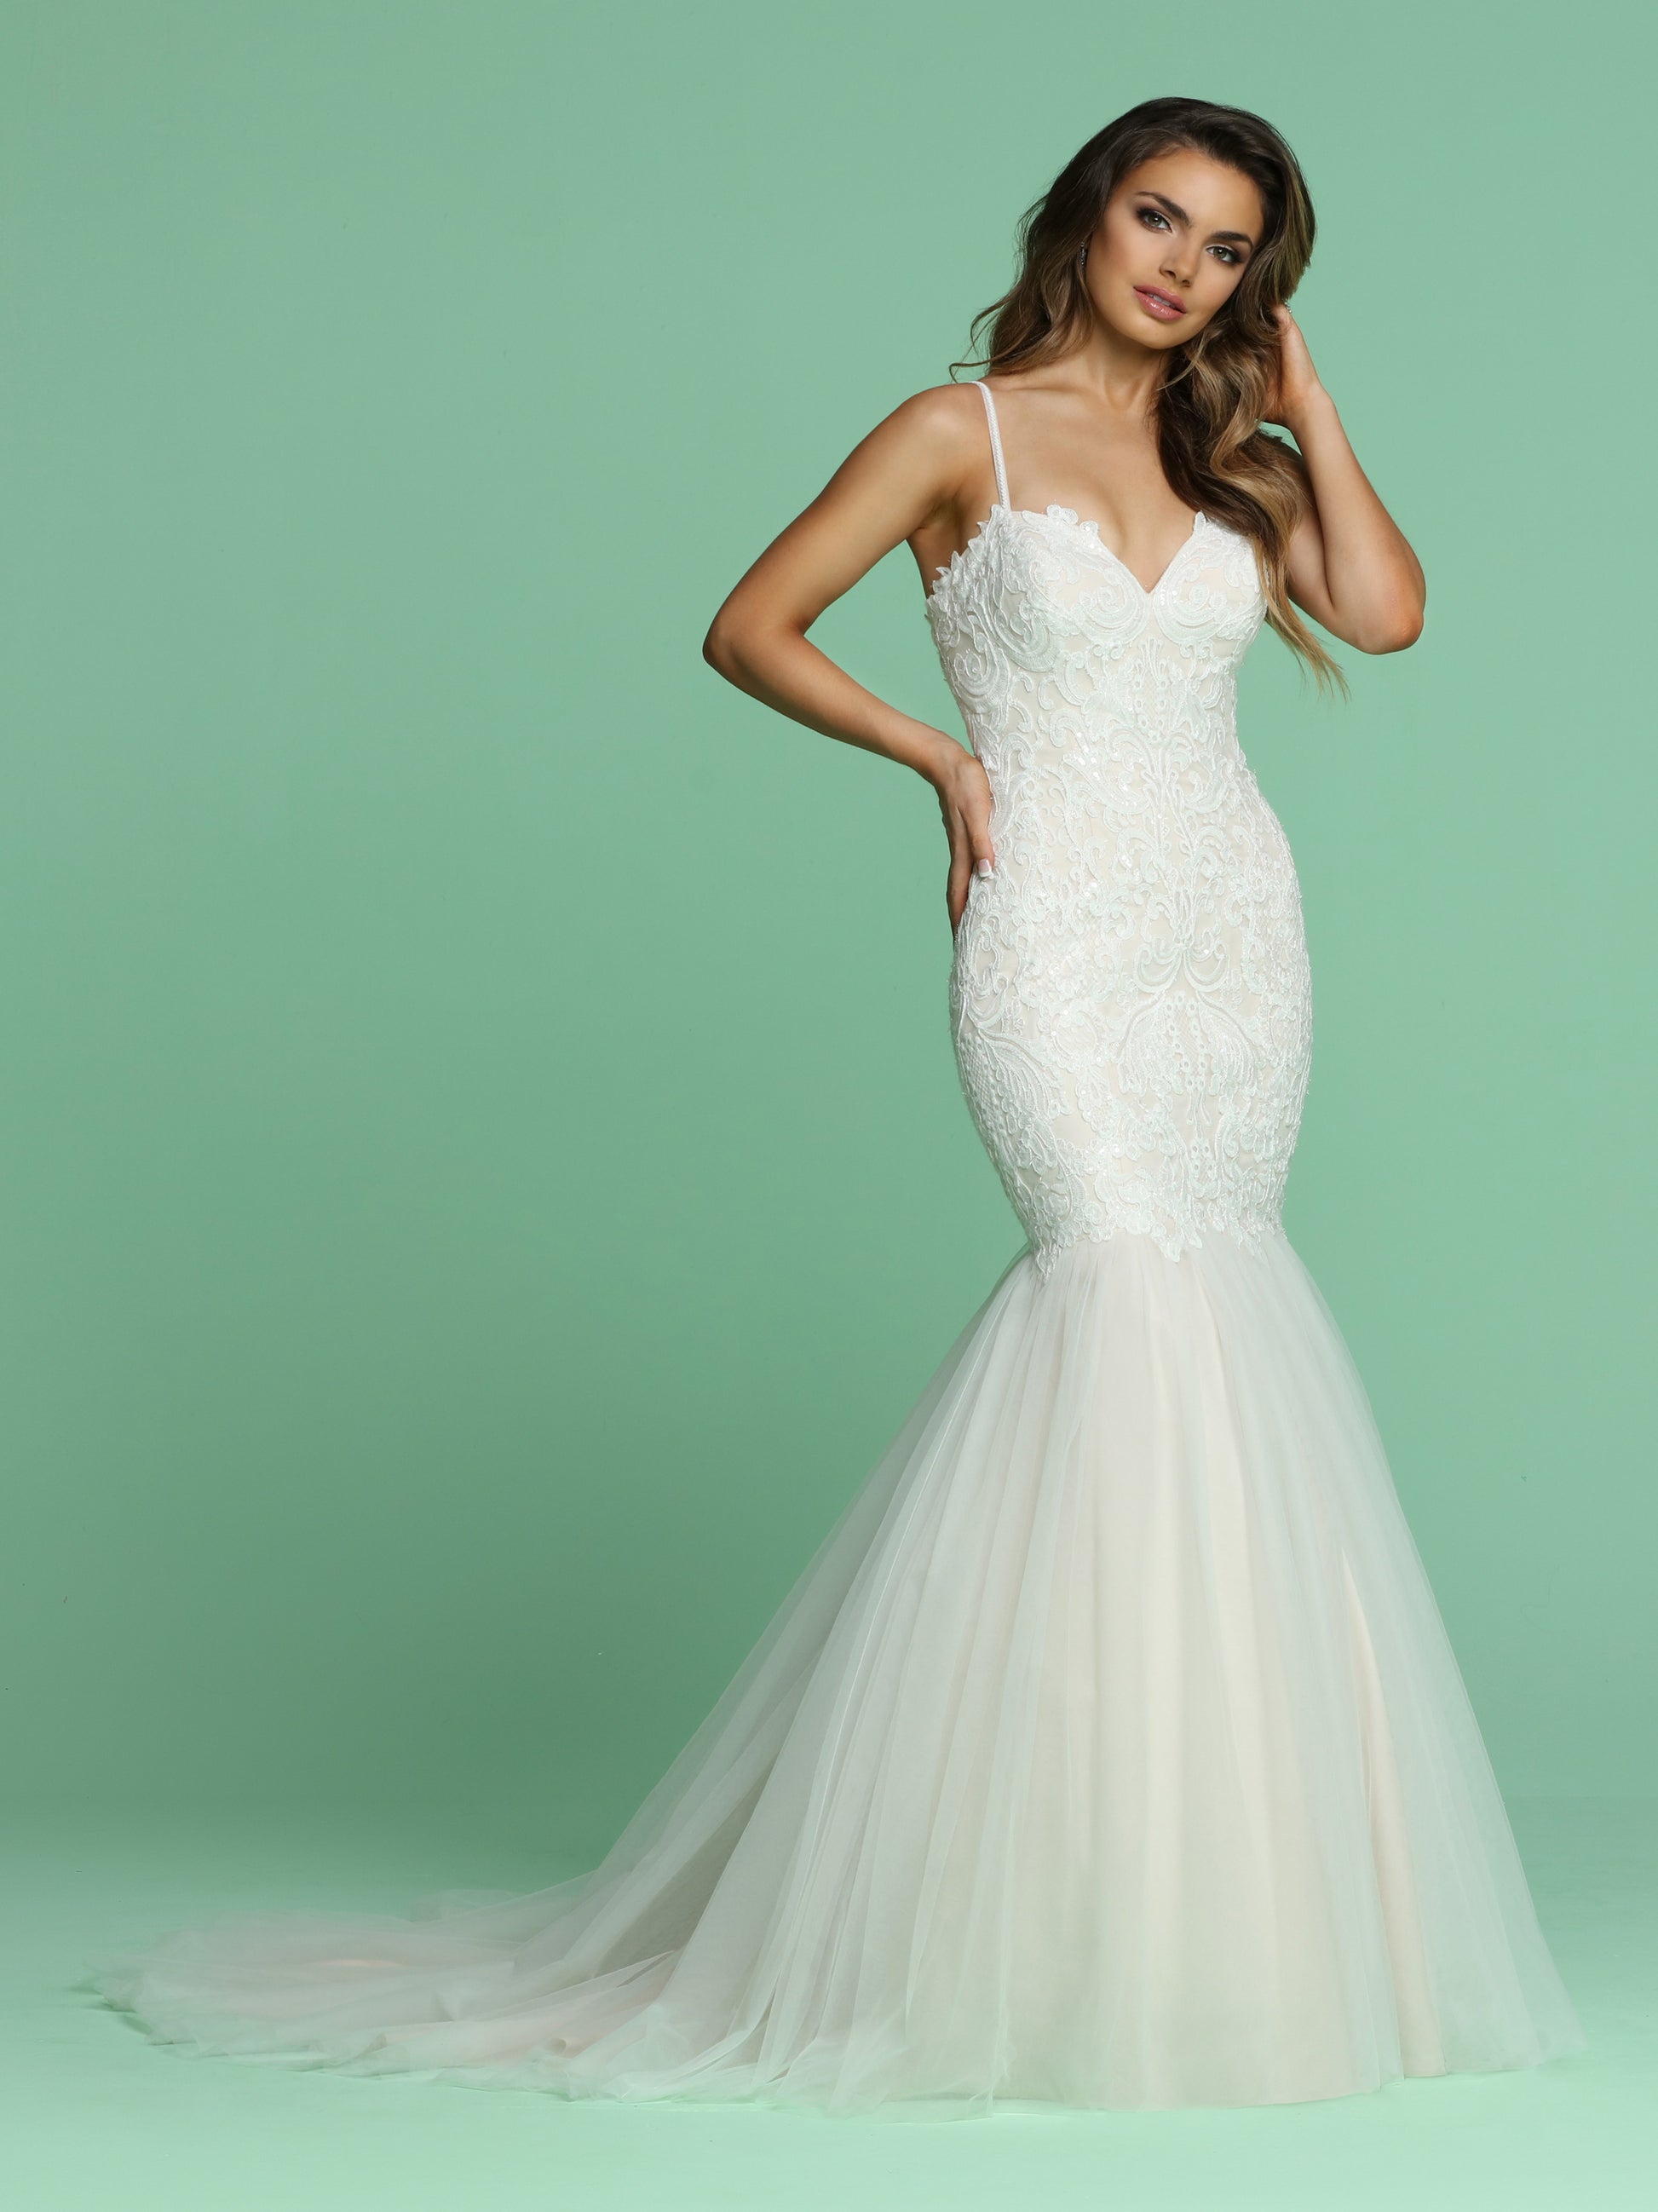 Davinci Bridal 50621 is a stunning sequin Embellished Embroidered Lace Fit & Flare Mermaid Wedding Dress. Featuring a soft Tulle Trumpet Skirt with a lush sweeping train. Lace up corset back.  Available for 1-2 Week Delivery!!!  Available Sizes: 2,4,6,8,10,12,14,16,18,20  Available Colors: Ivory/Blush, Ivory/Ivory  Available Sizes: 2-30  Available Colors: Ivory/Blush, Ivory/Ivory, White/White